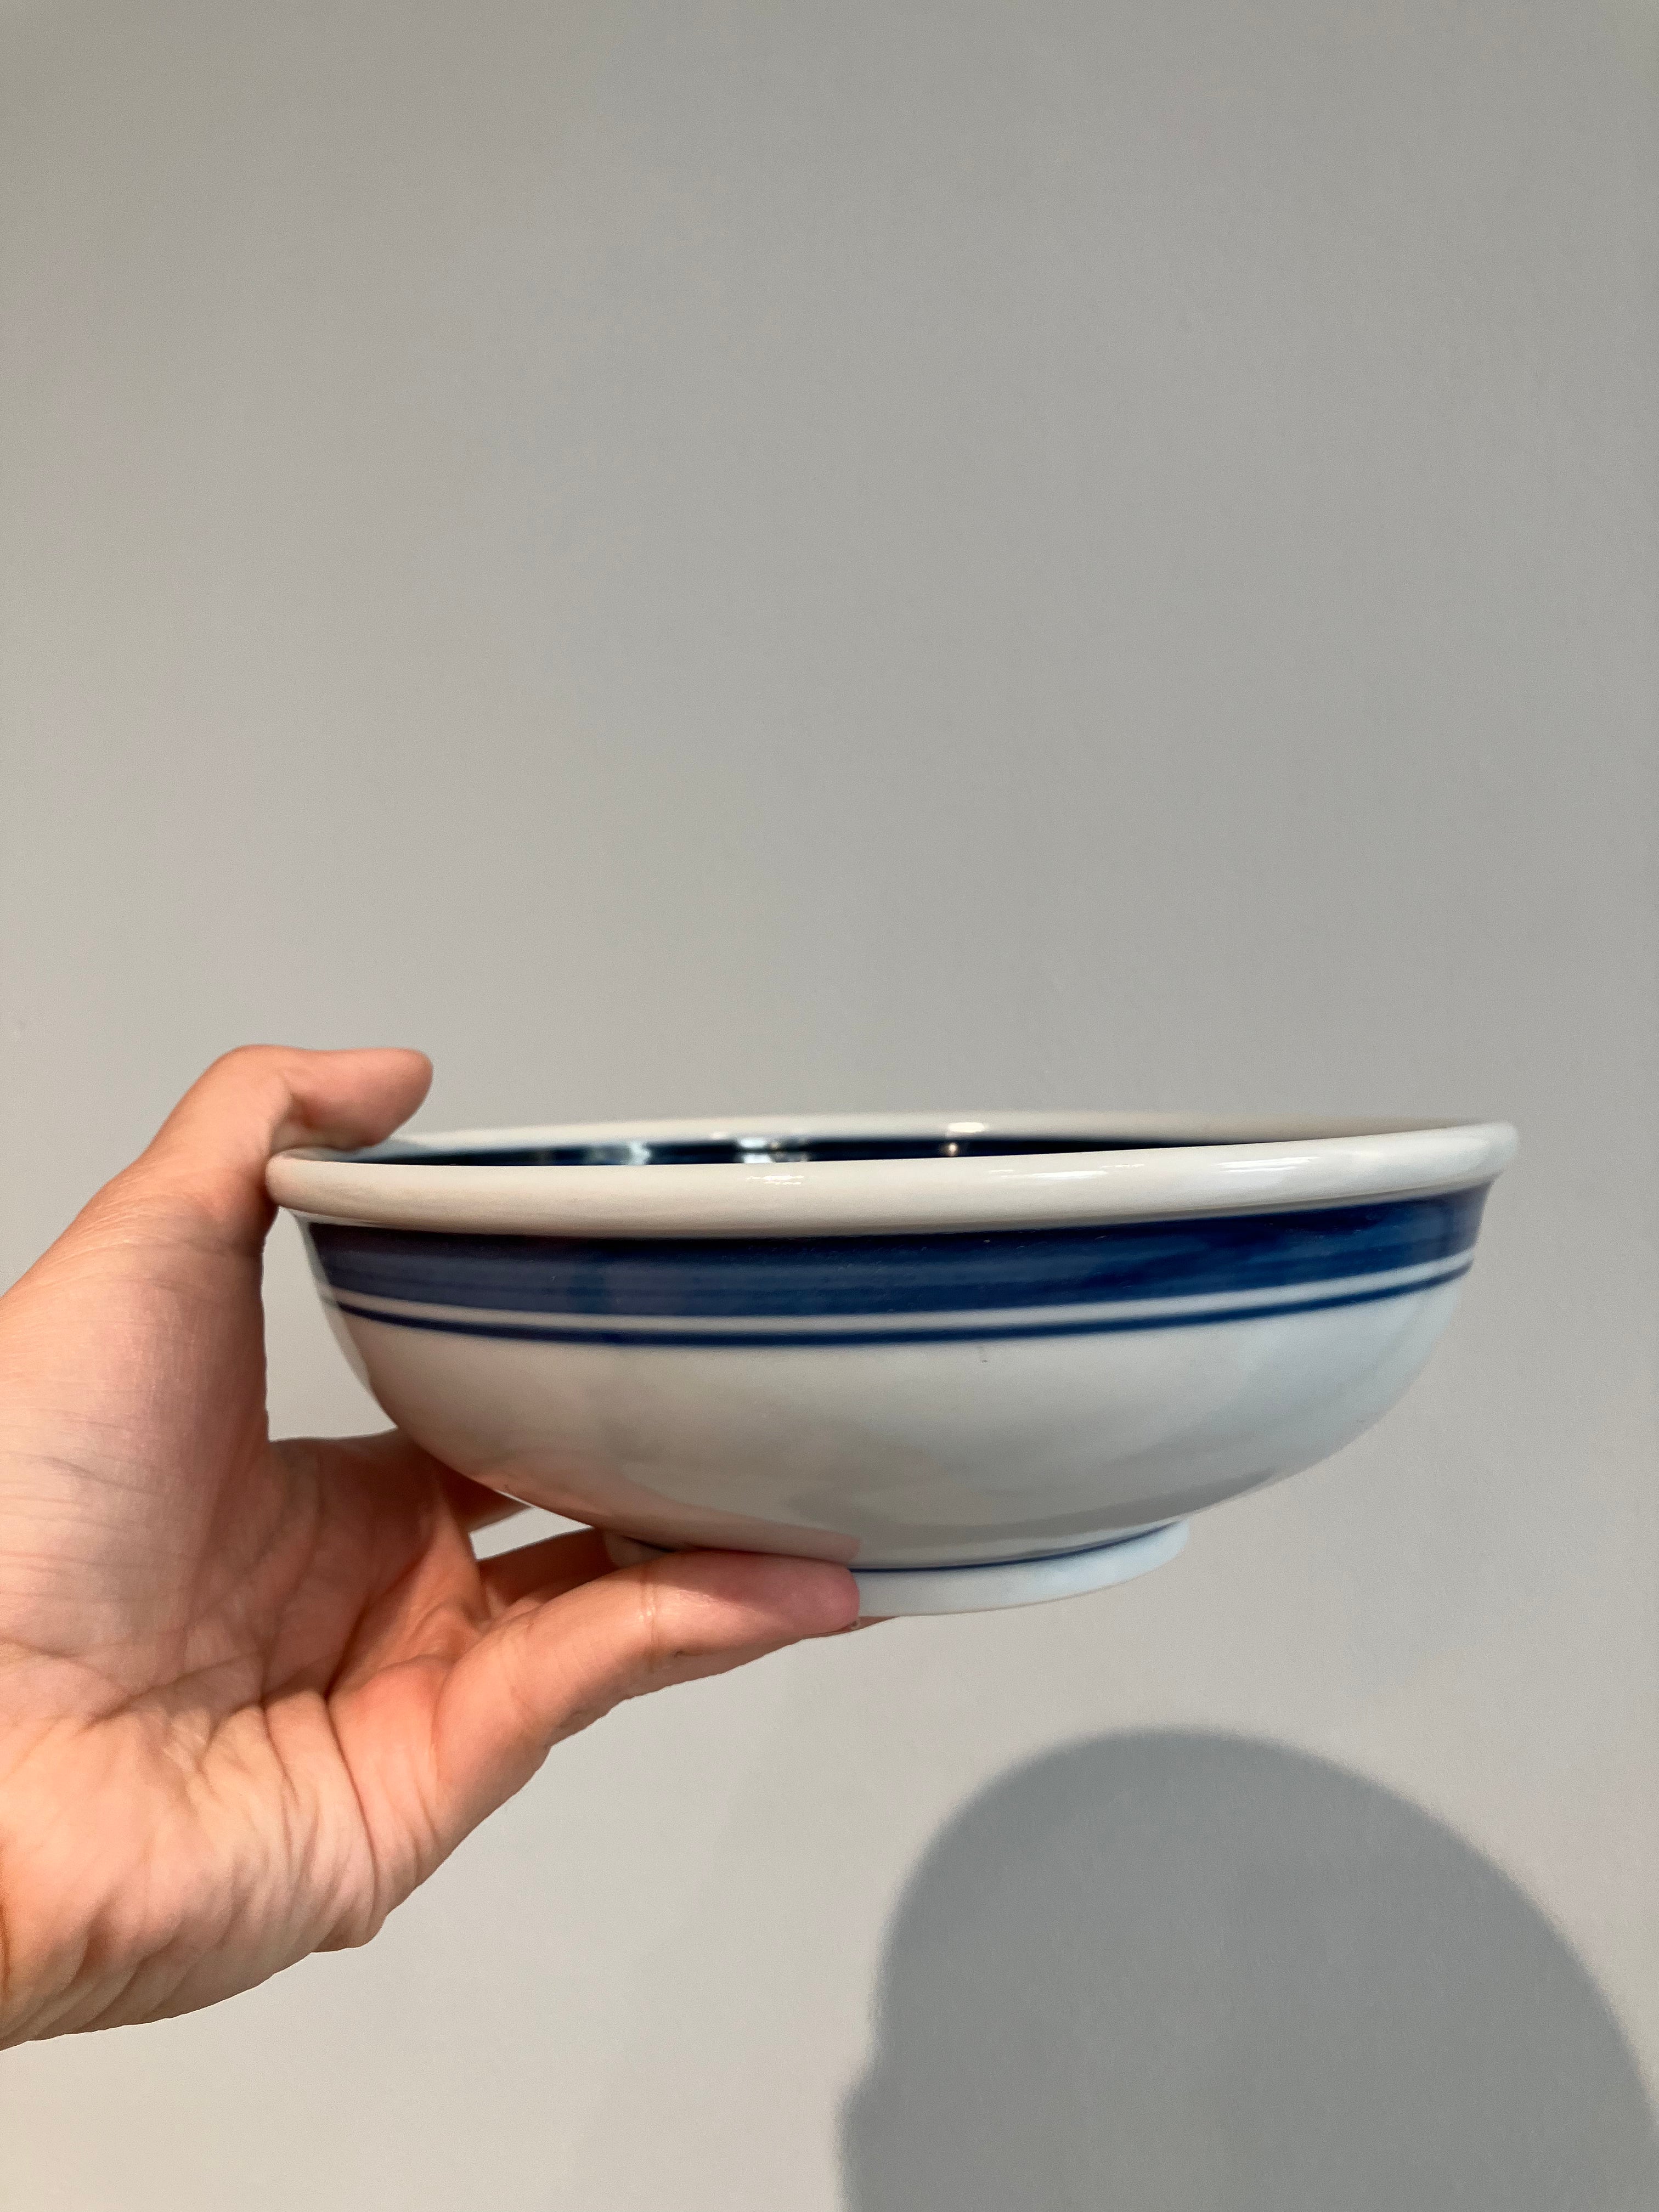 Bowl with a motif of a cat in dark blue